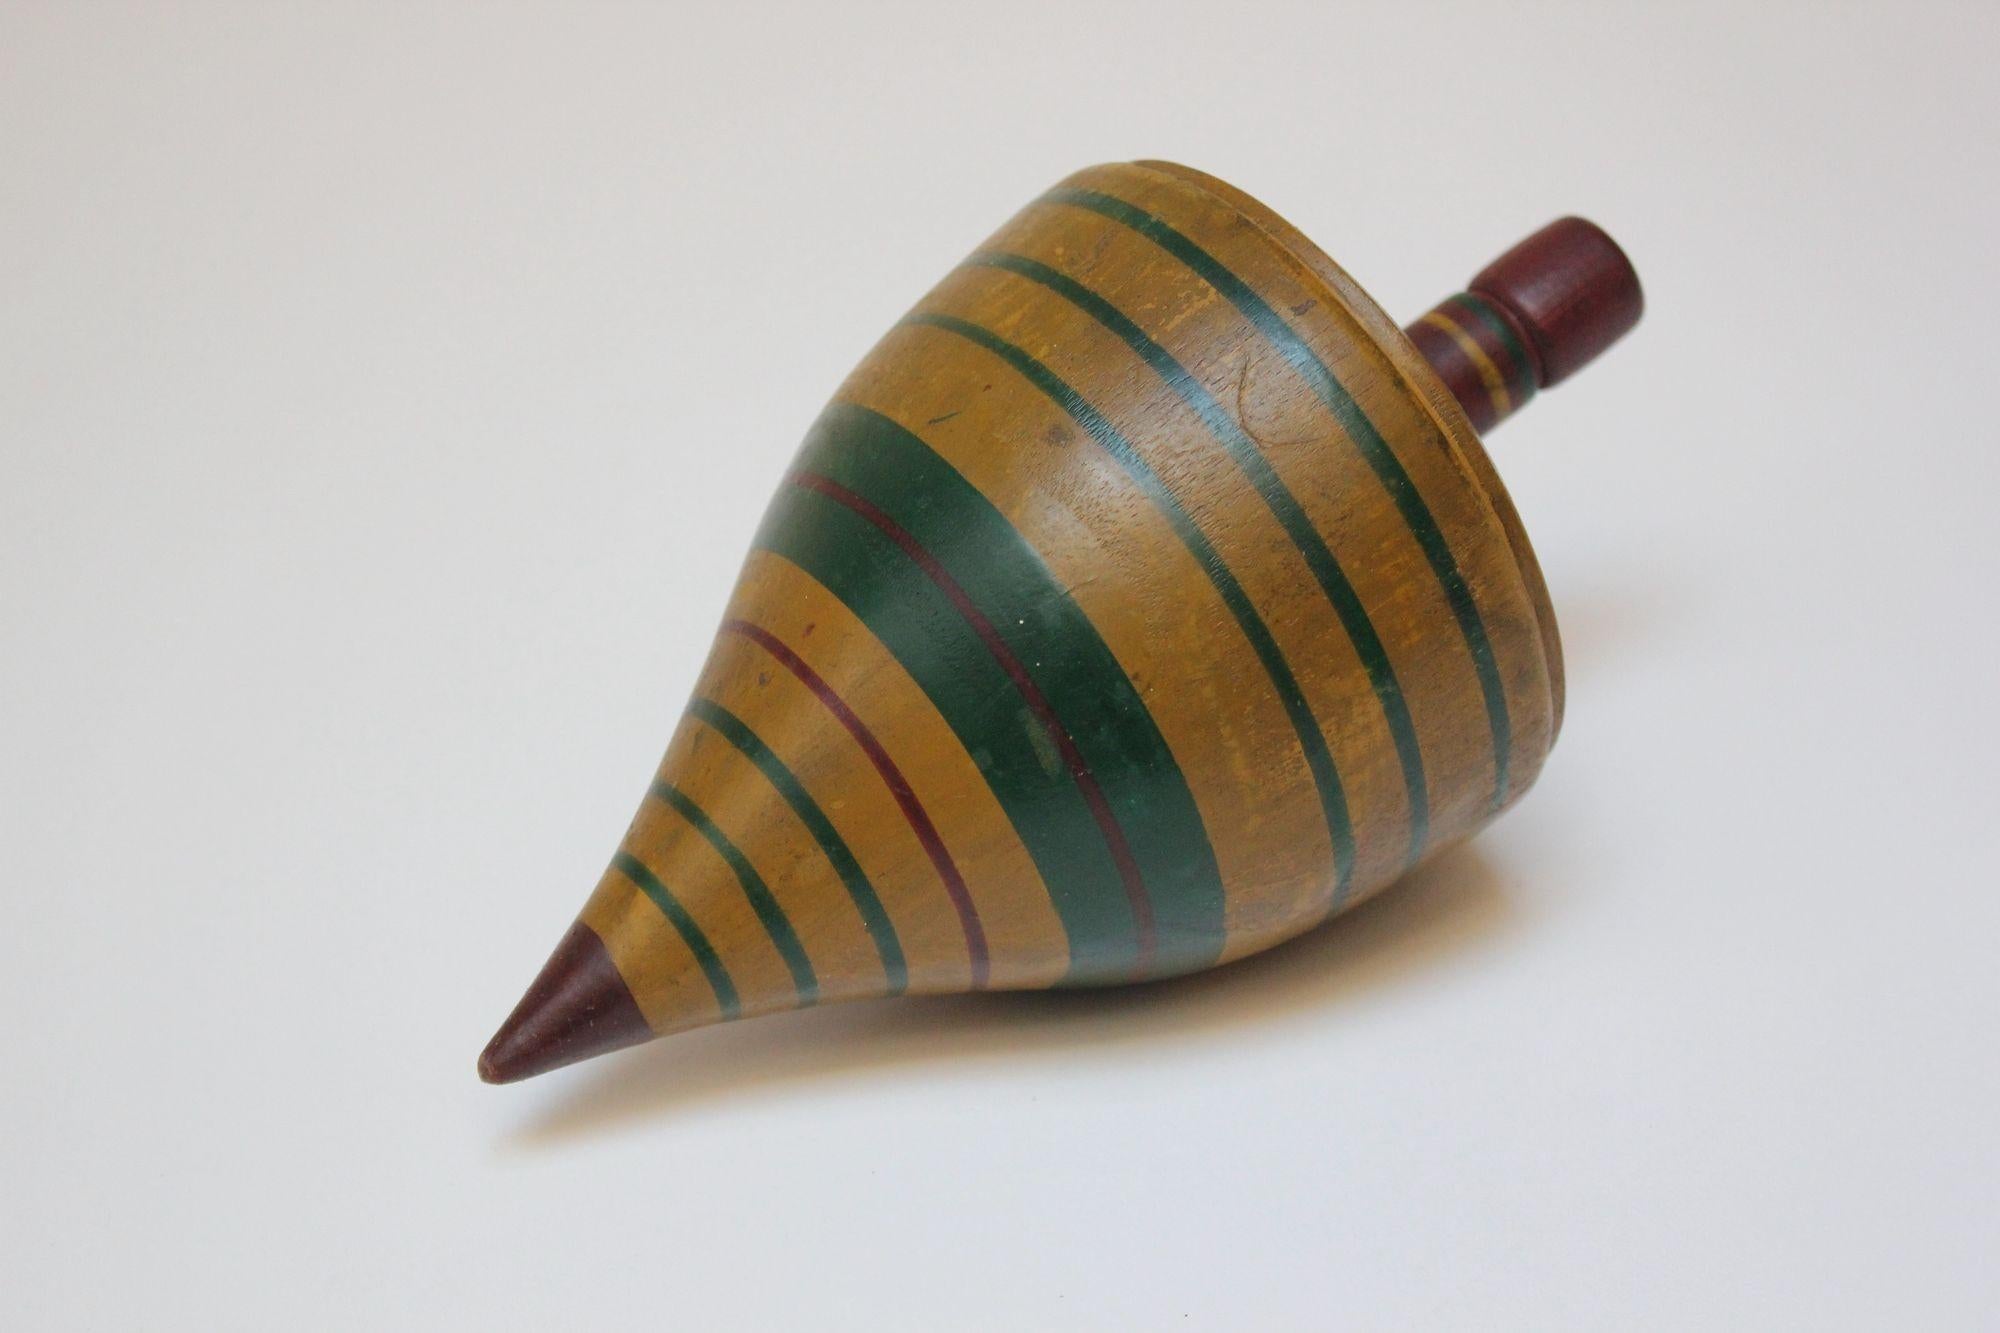 Folk Art turned and painted wooden toy top retaining its original paint (ca. late 19th Century, USA).
Features a notched stem and striped multi-color design in yellow, green and red.
Very good, antique condition with patina/light scuffing and minor